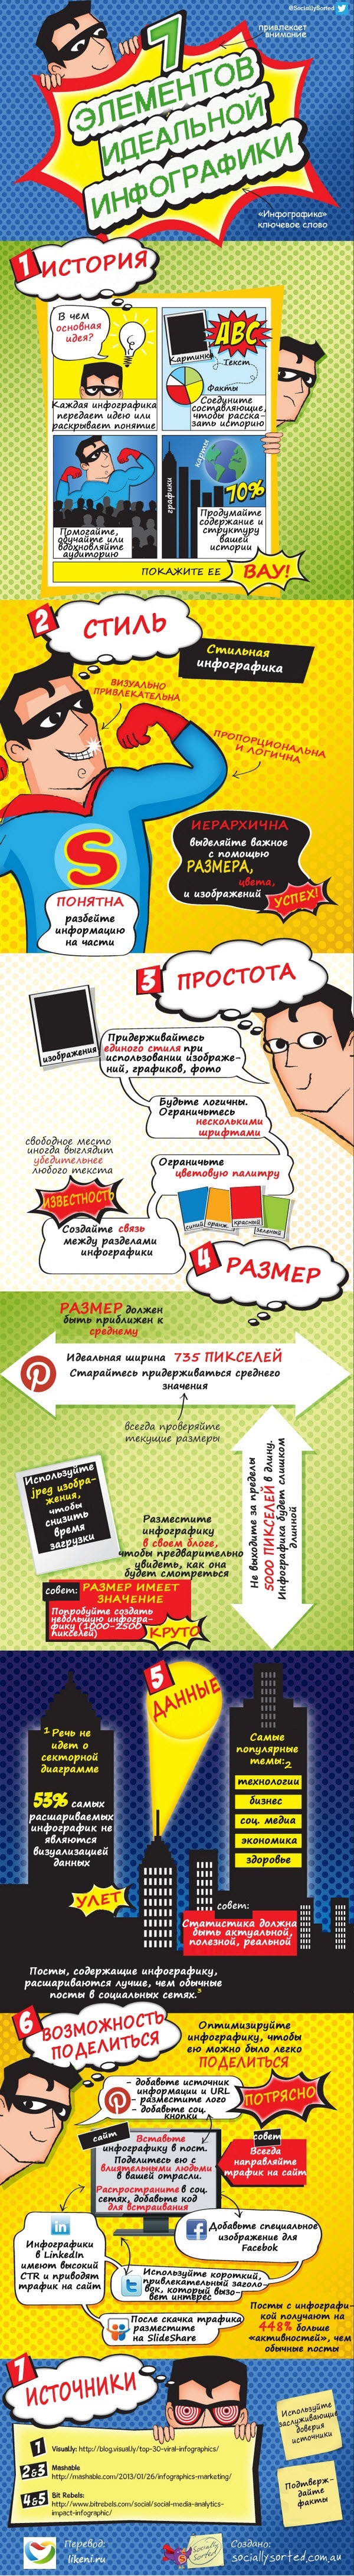 7-Priniciples-of-an-Awesome-Inforgraphic1.jpg